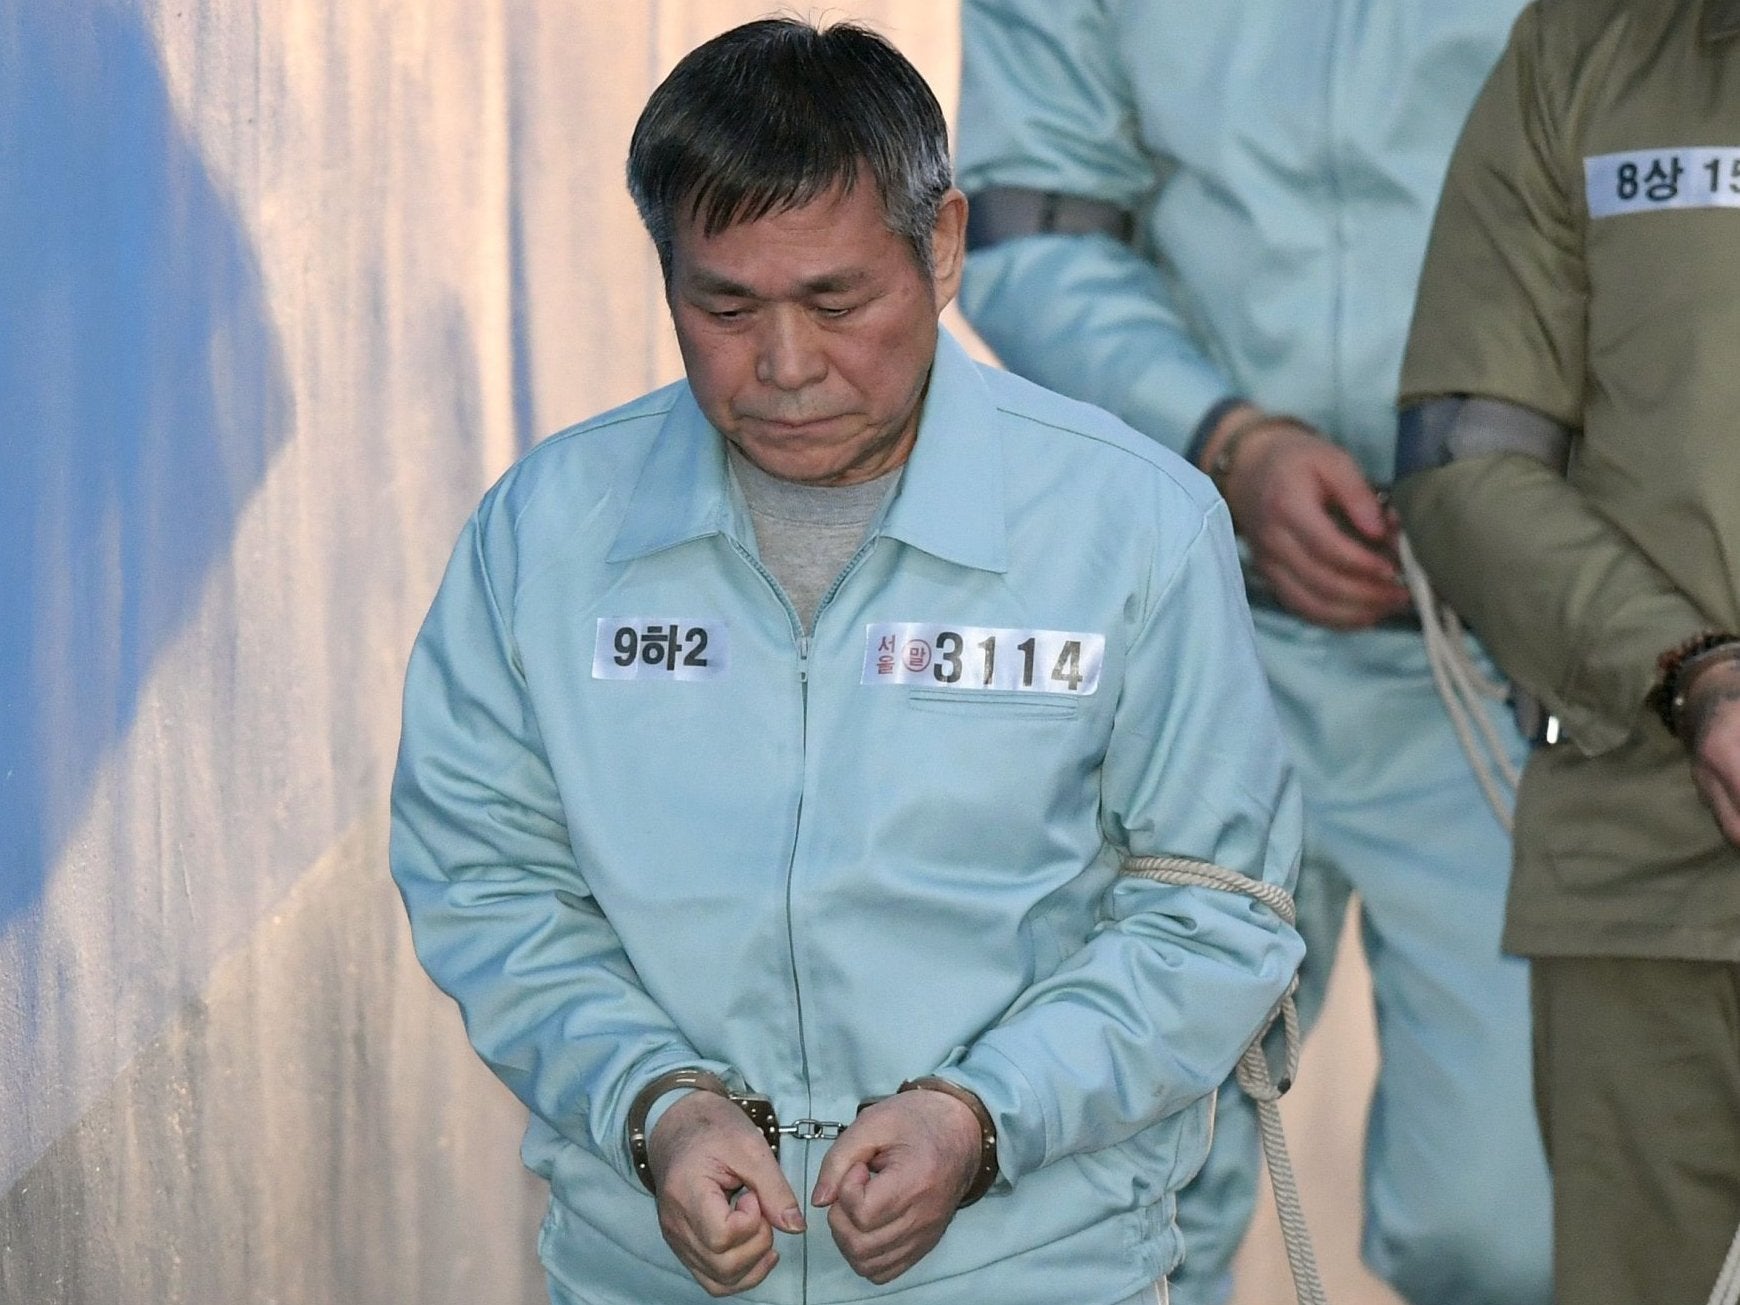 South Korean pastor Lee Jaerock arrives at the Seoul Central District Court to attend his trial in Seoul on 22 November